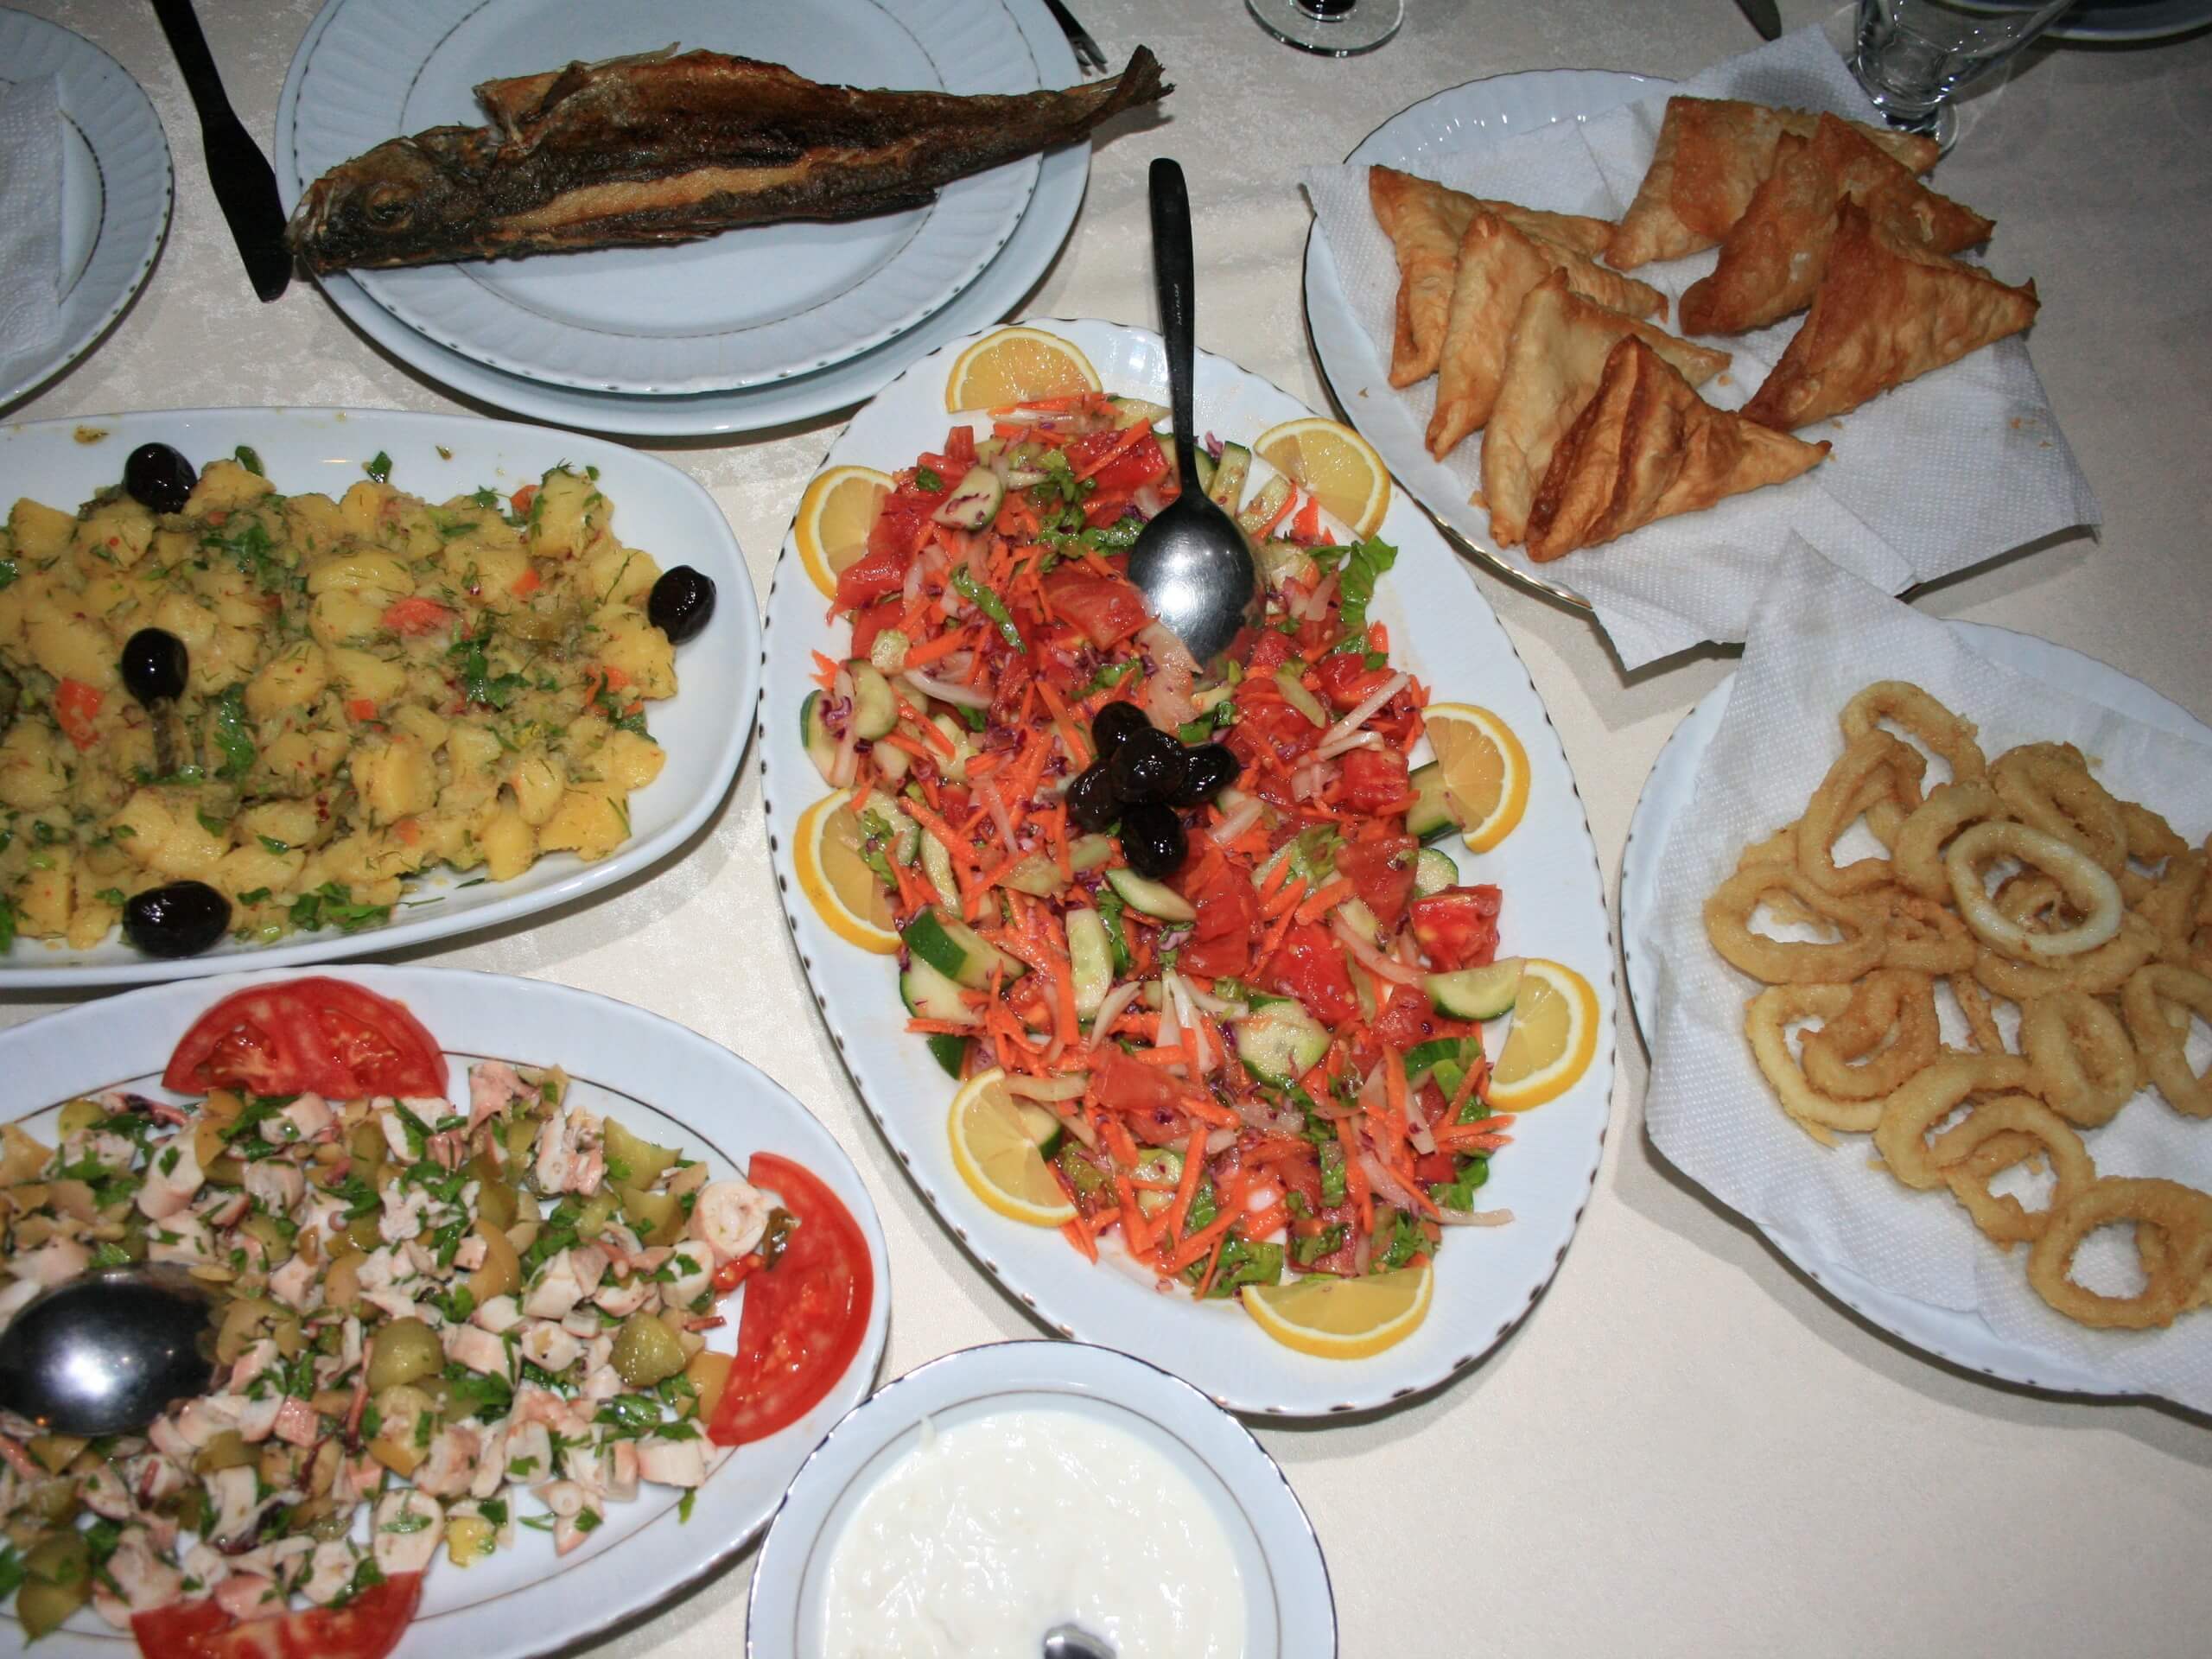 Turkish cuisine served onboard the gullet